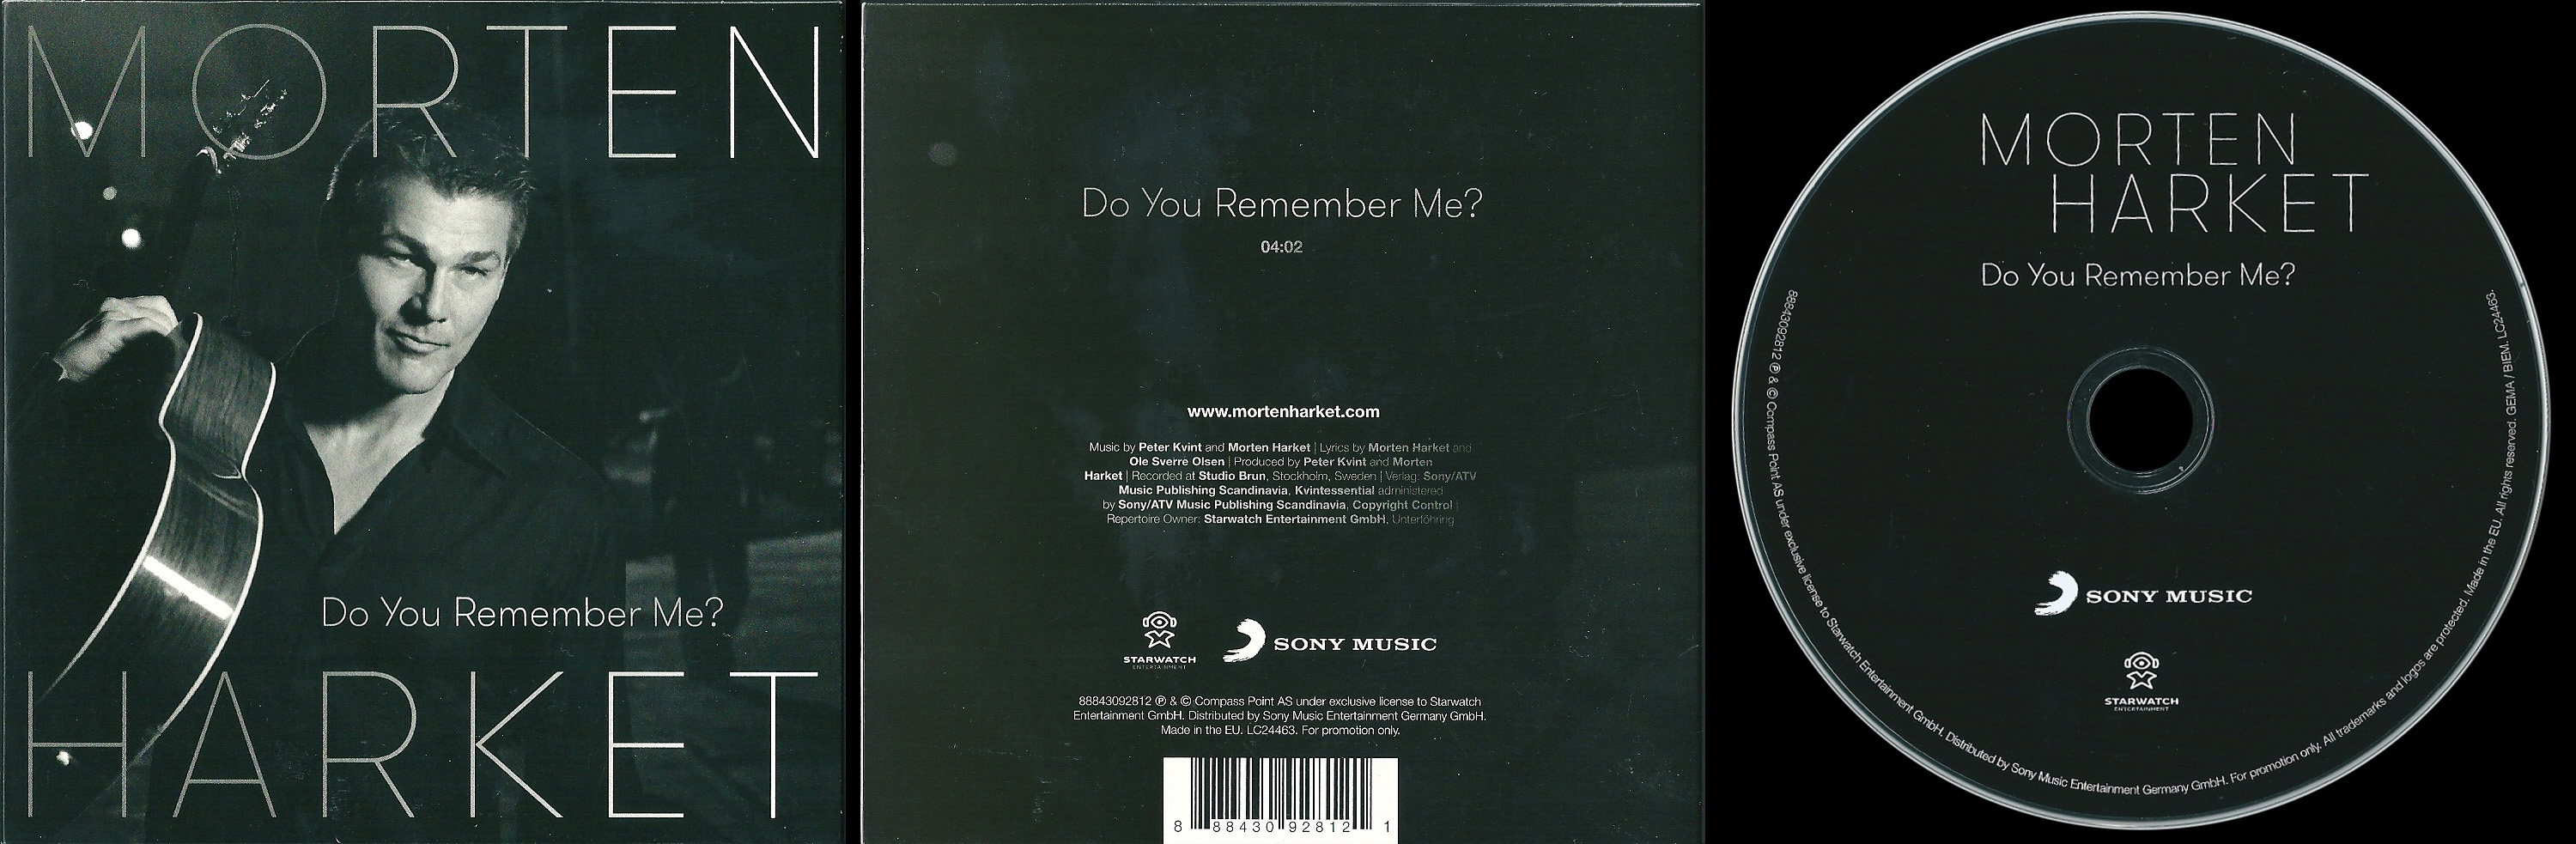 Do You Remember Me German promo - click to enlarge